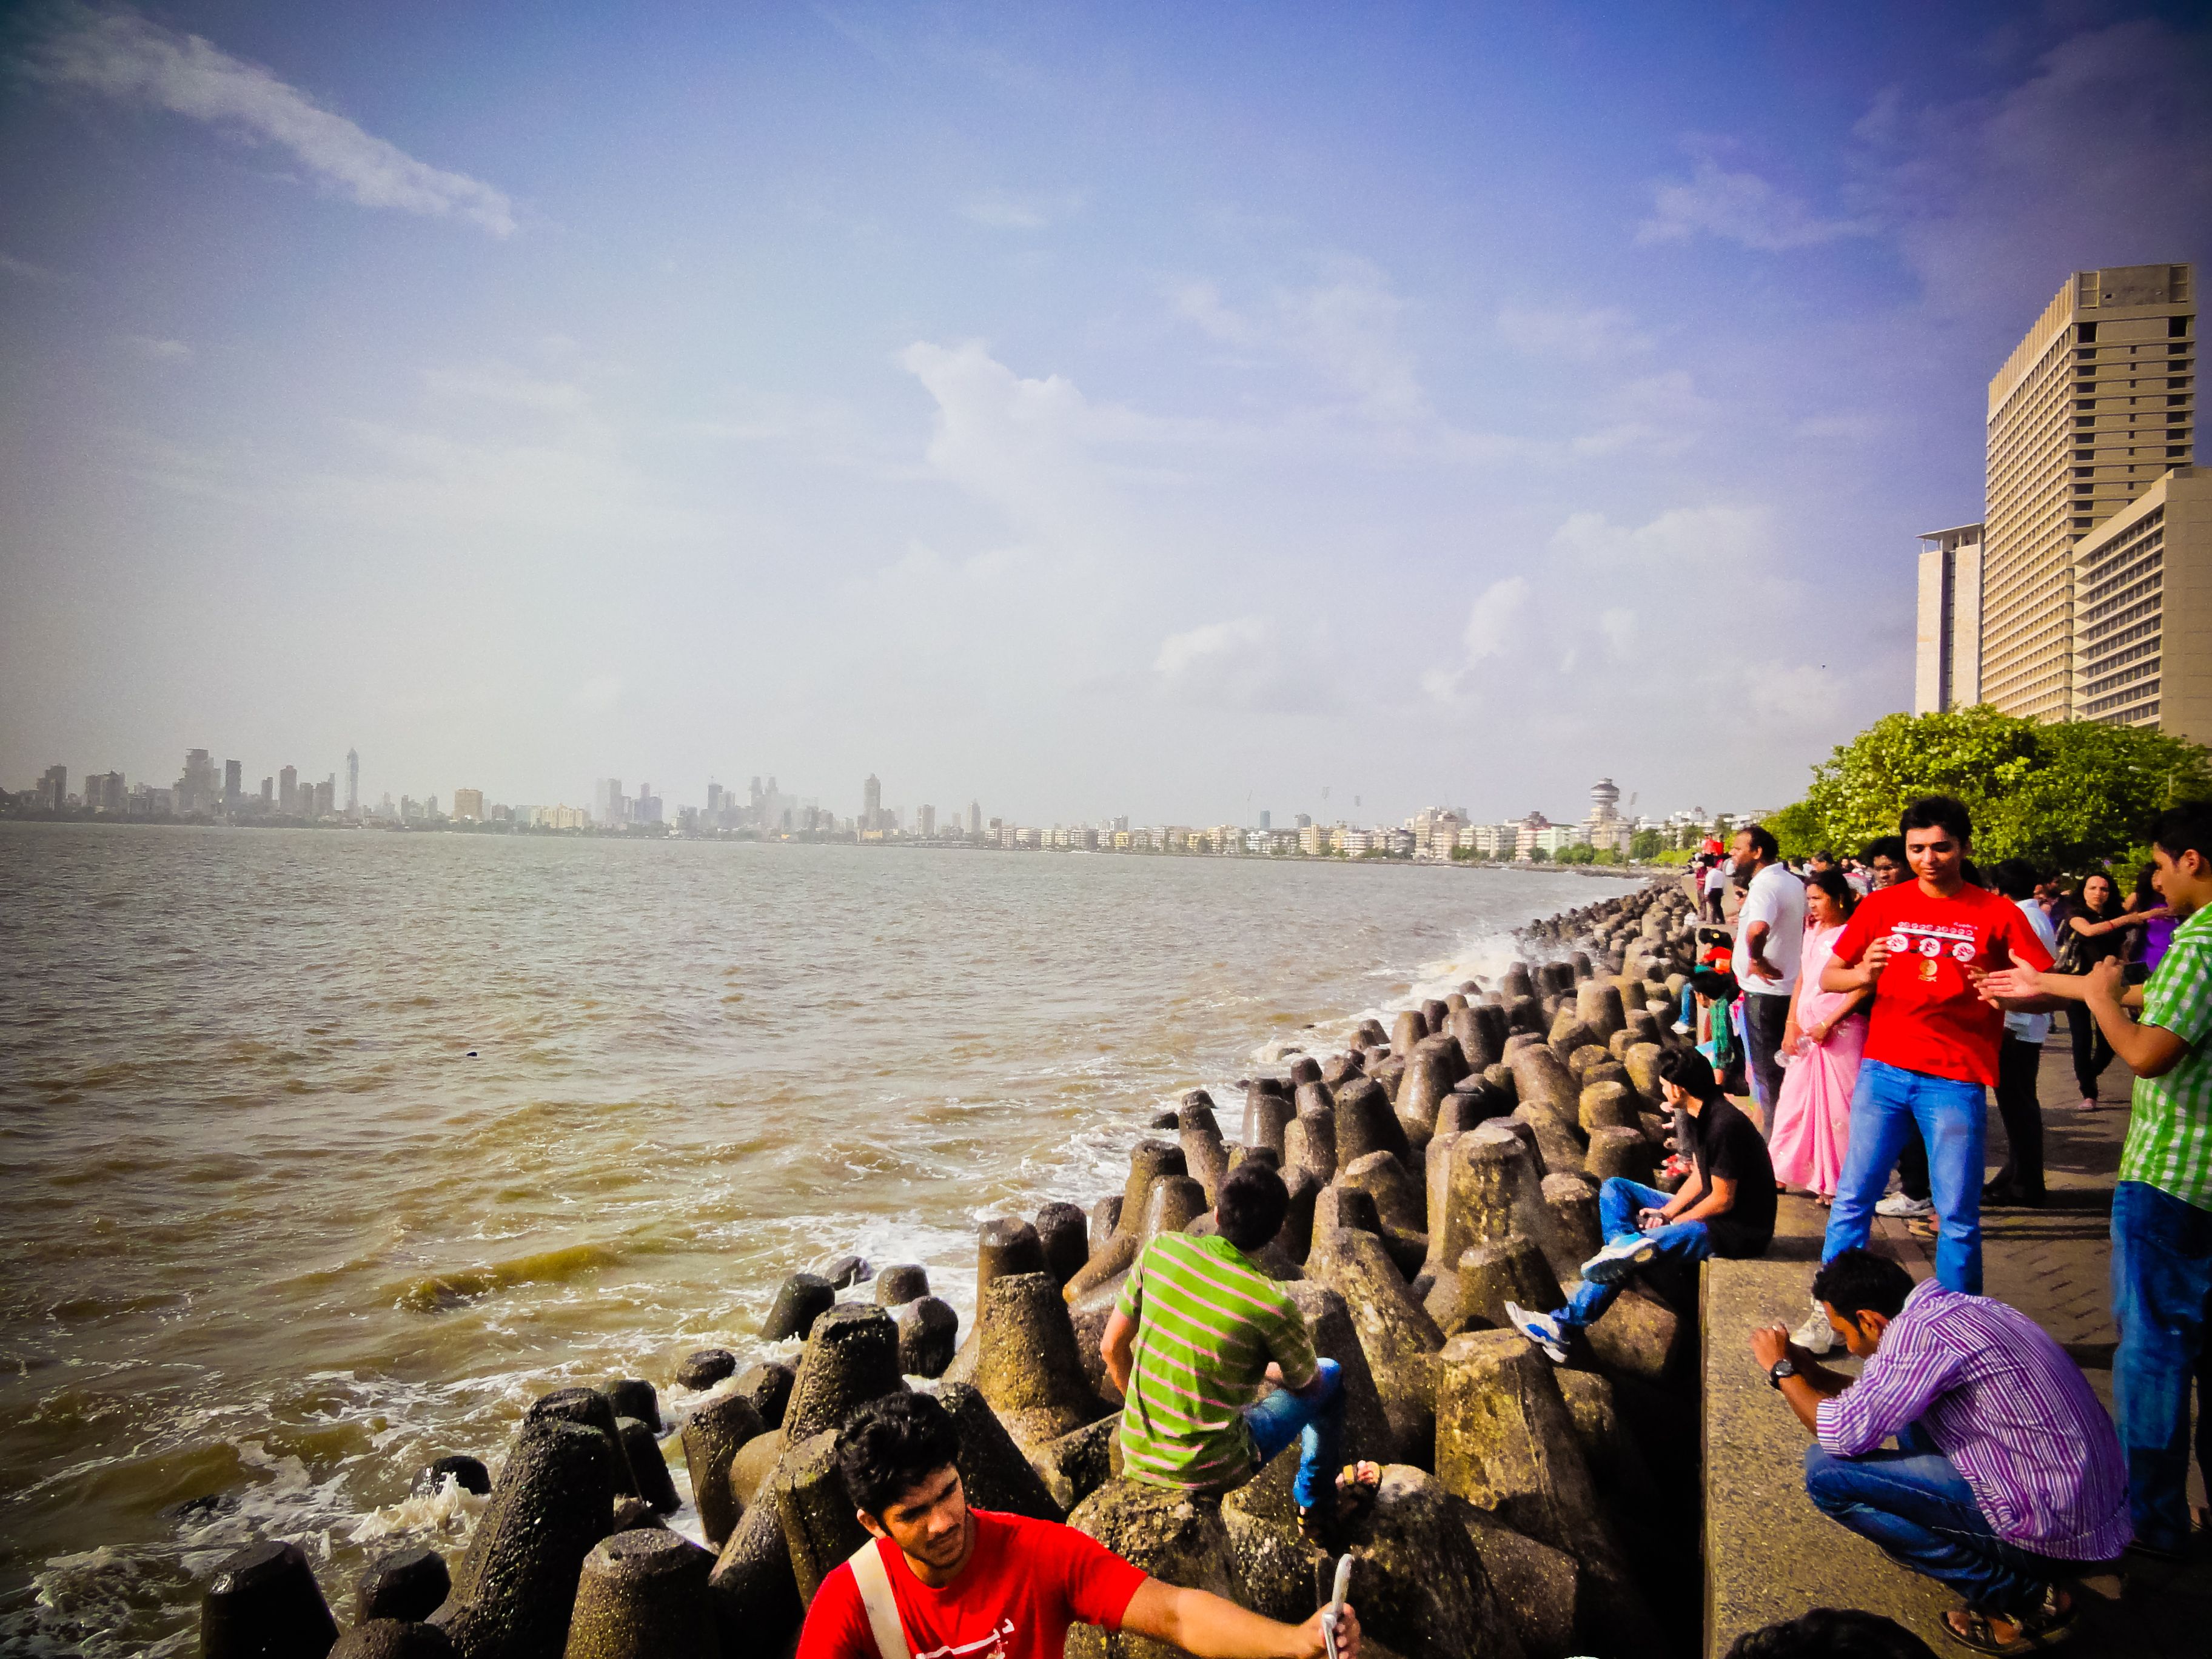 Holiday on the beaches in Mumbai wallpaper and image